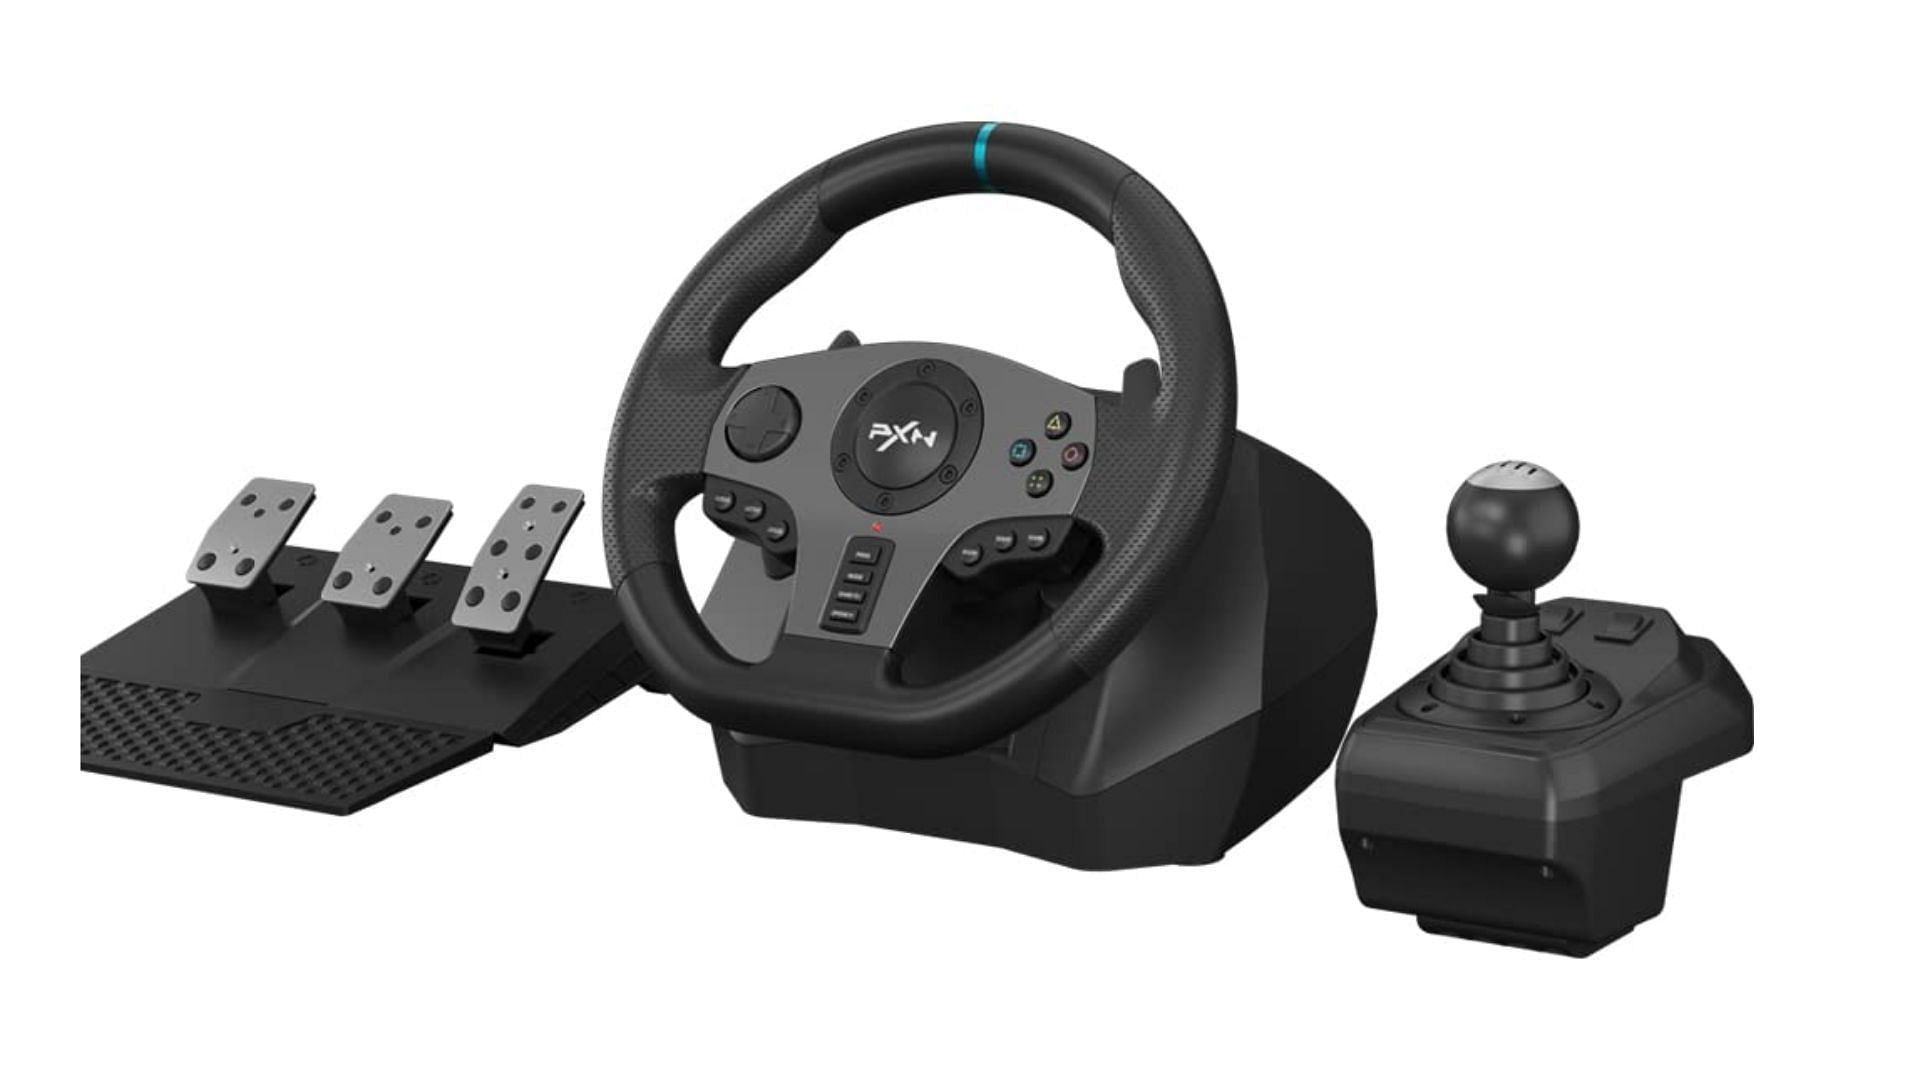 Best gaming setup accessories for driving-related games (Image via Ubuy)